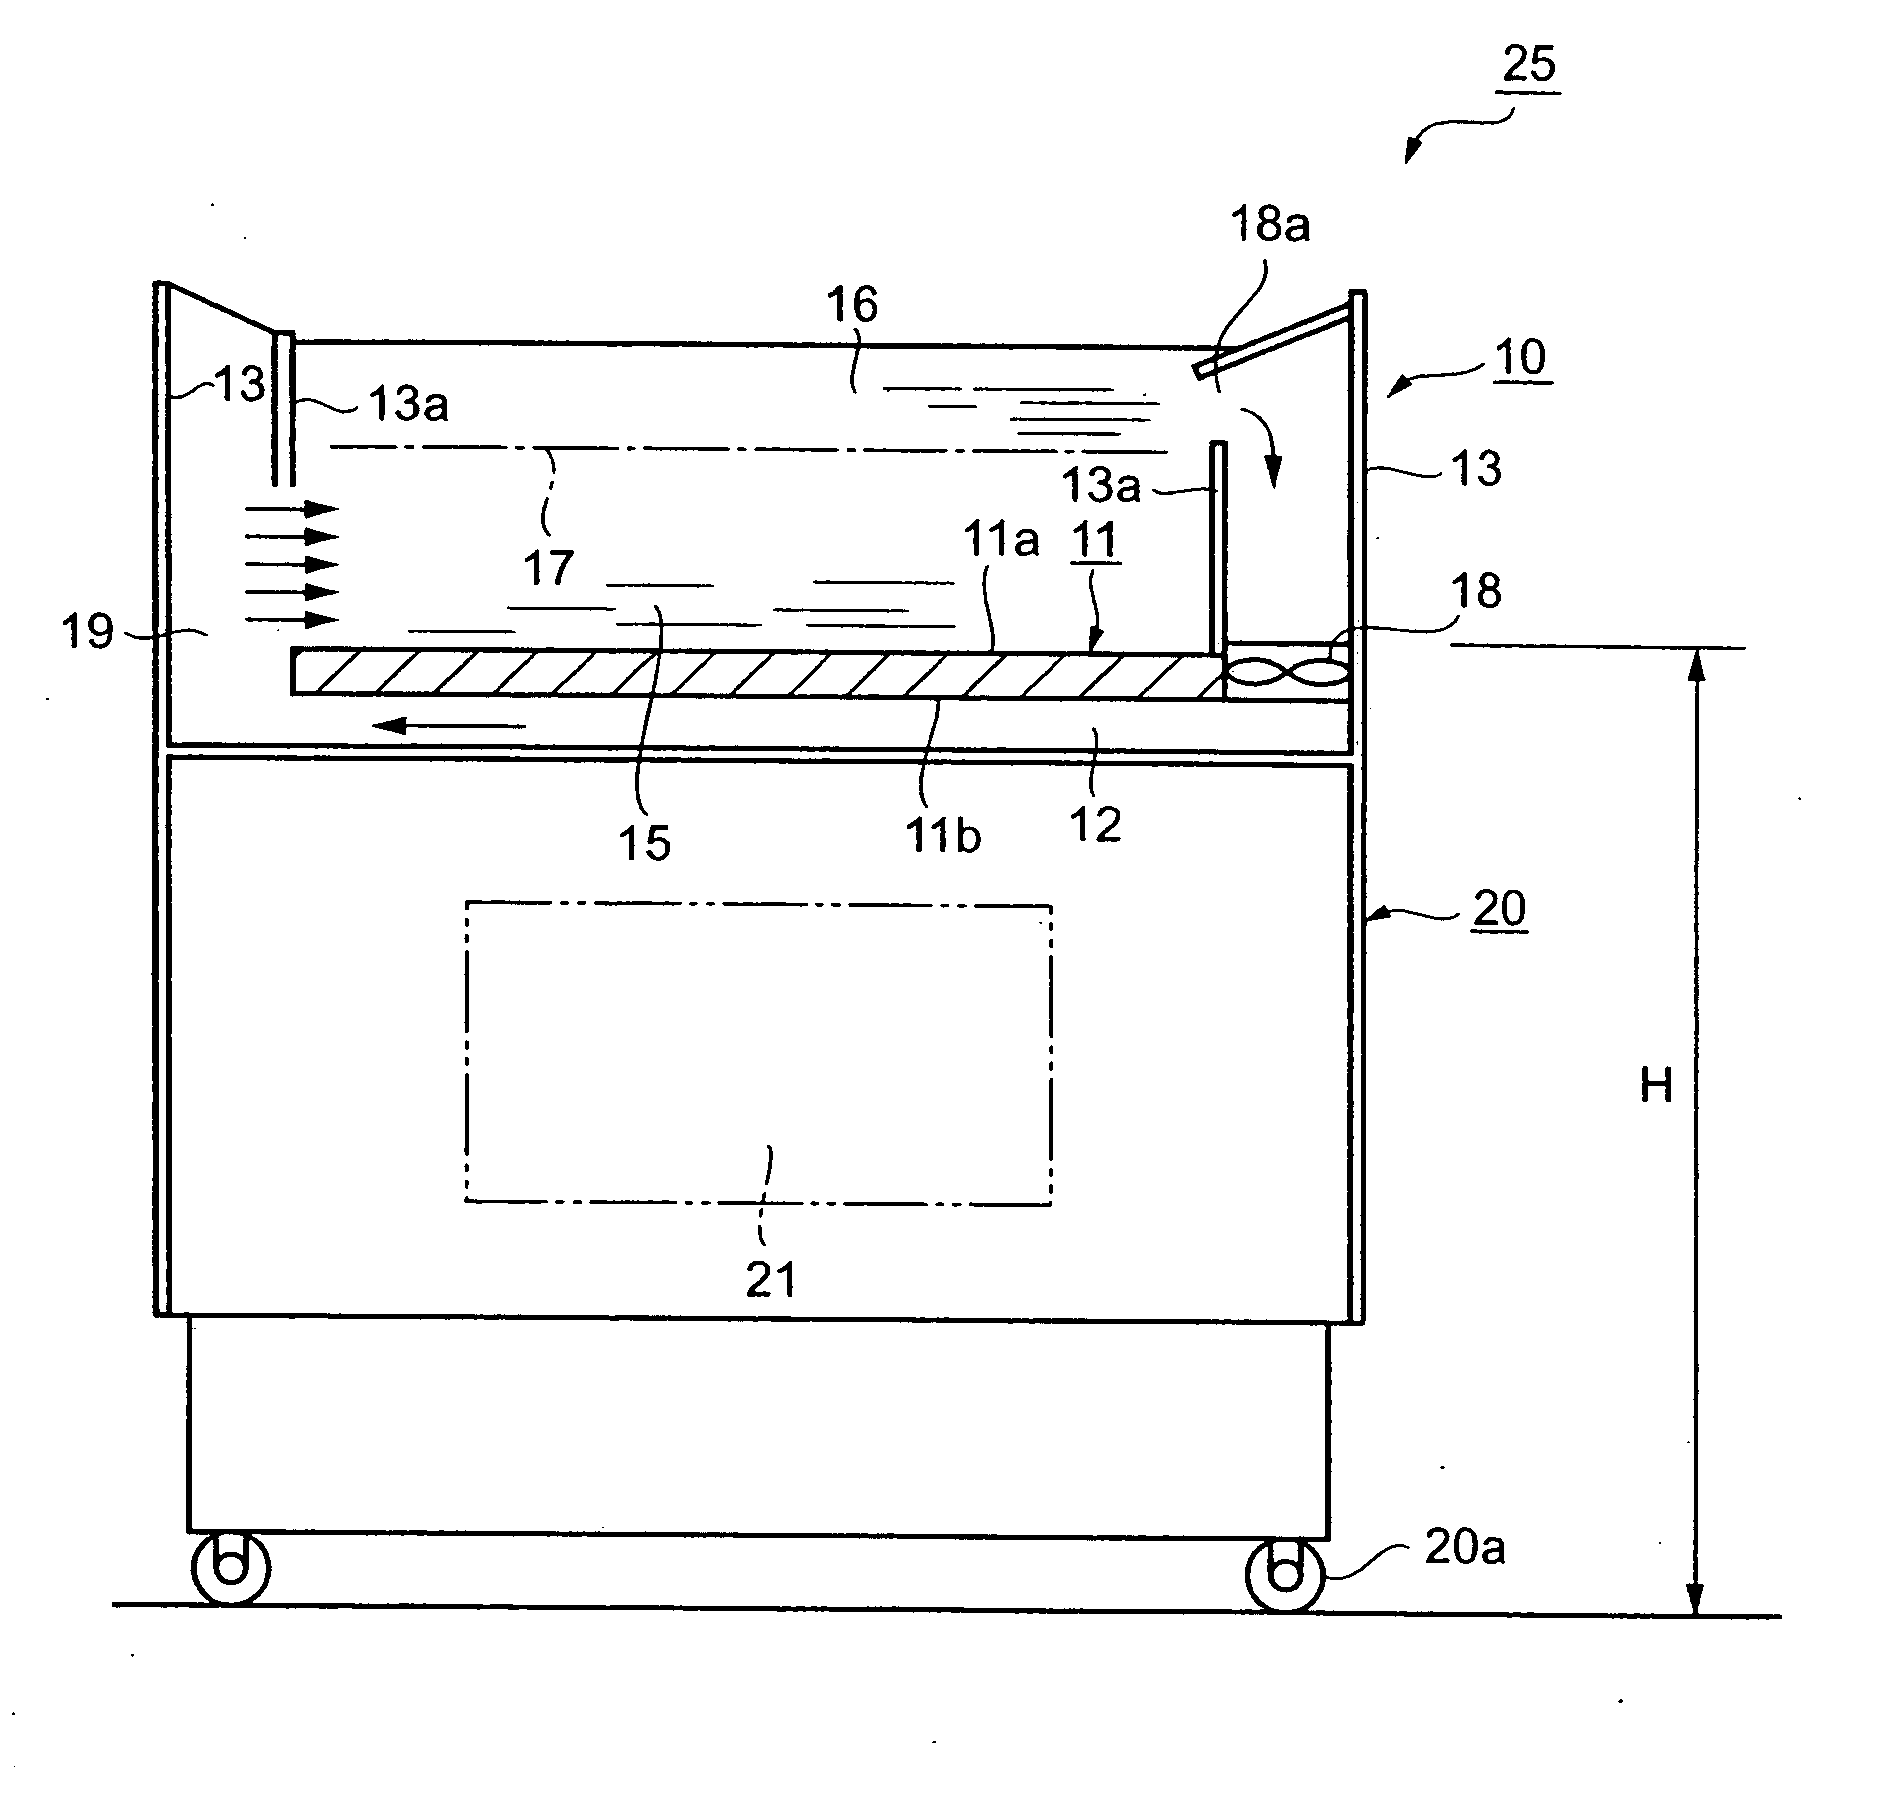 Low temperature zoning formation system for holding freshness of food